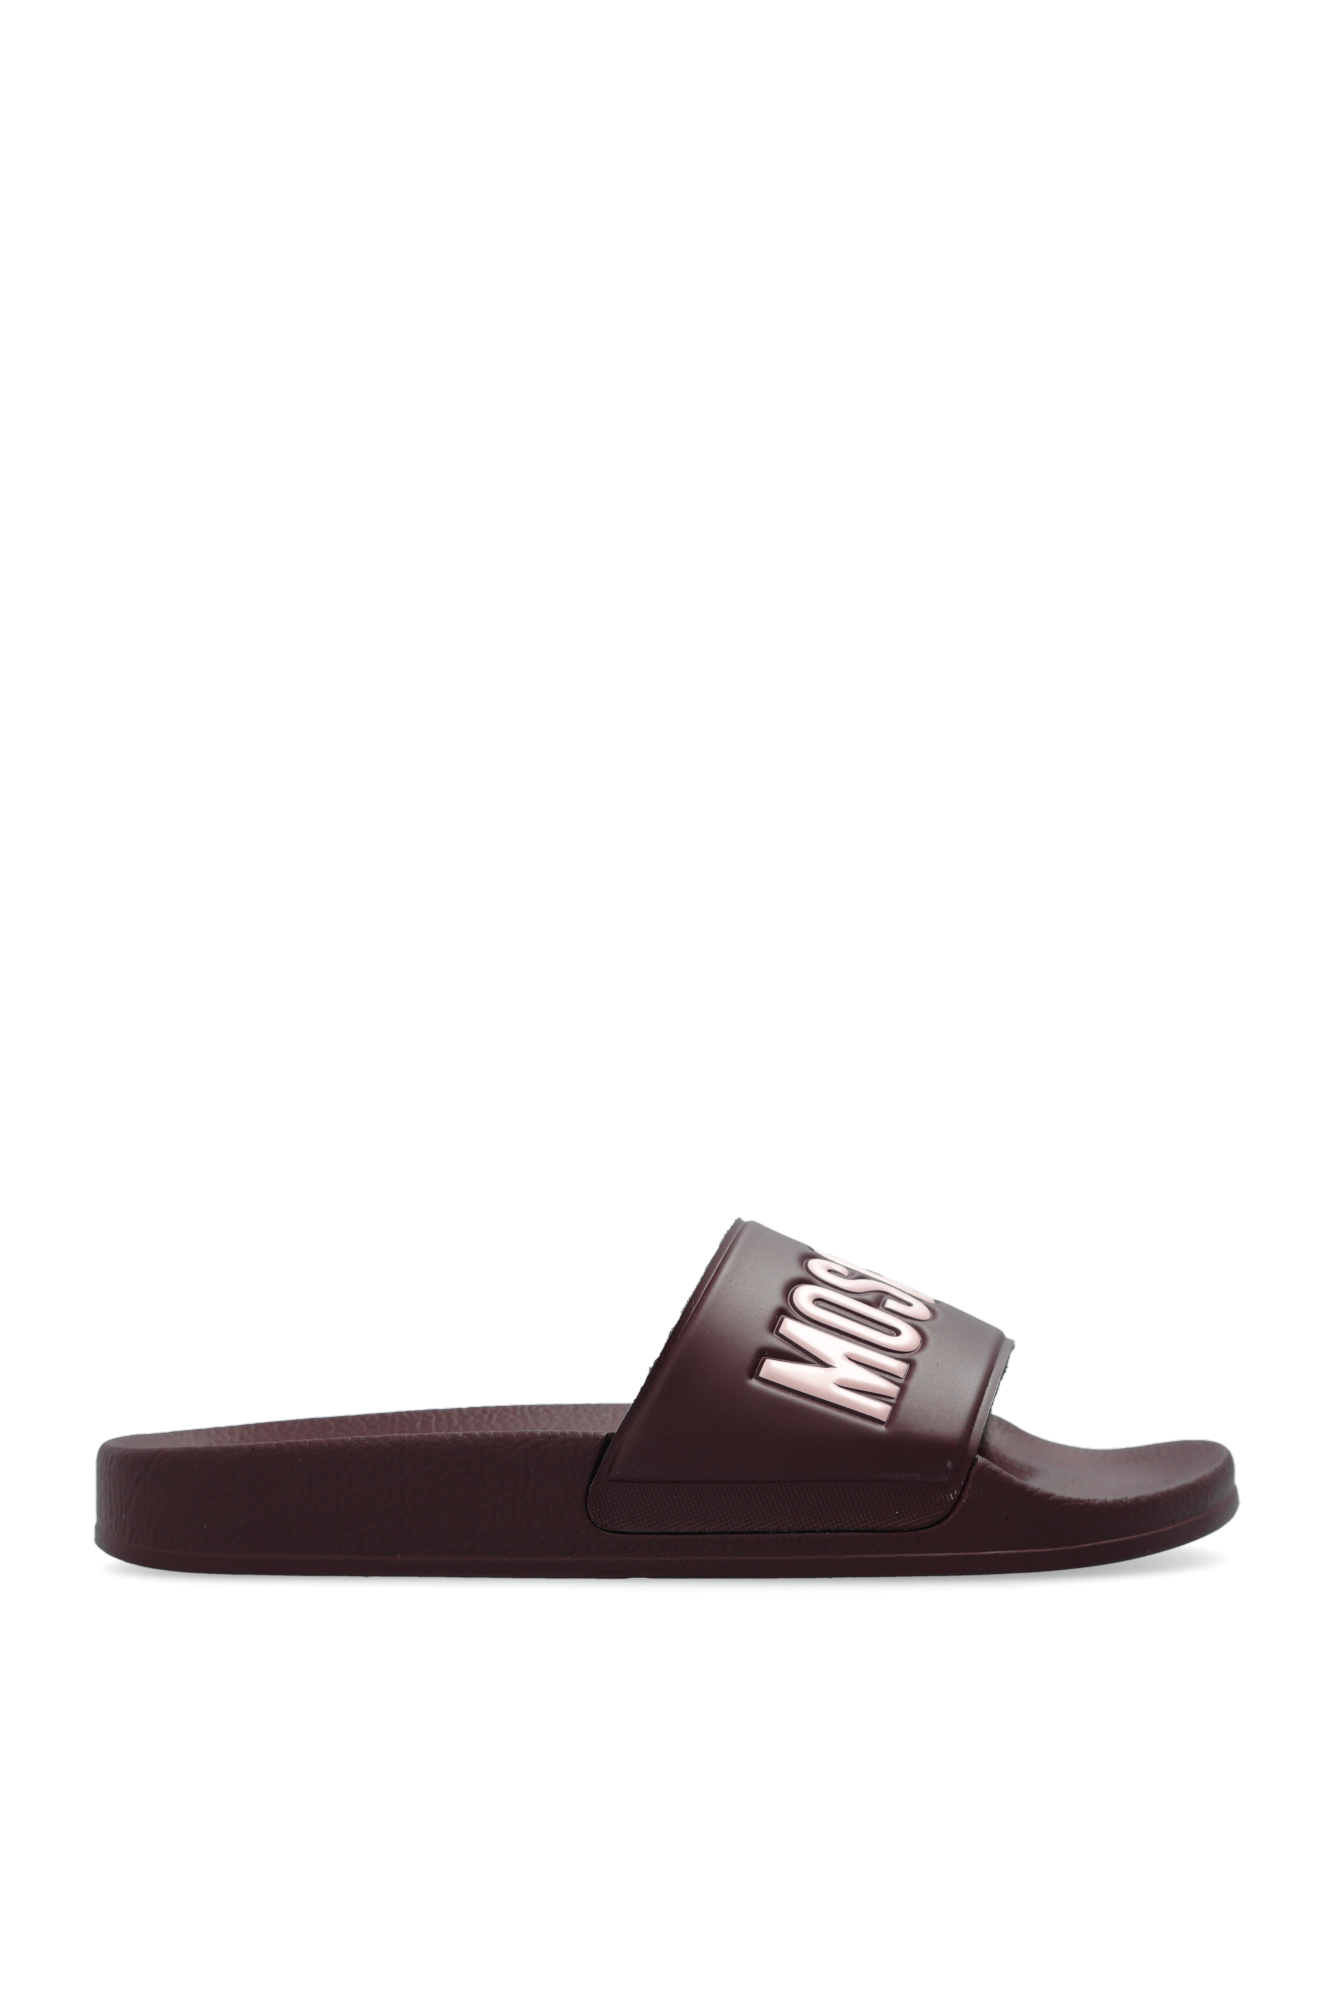 Moschino Rubber slides with logo | Women's Shoes | Vitkac